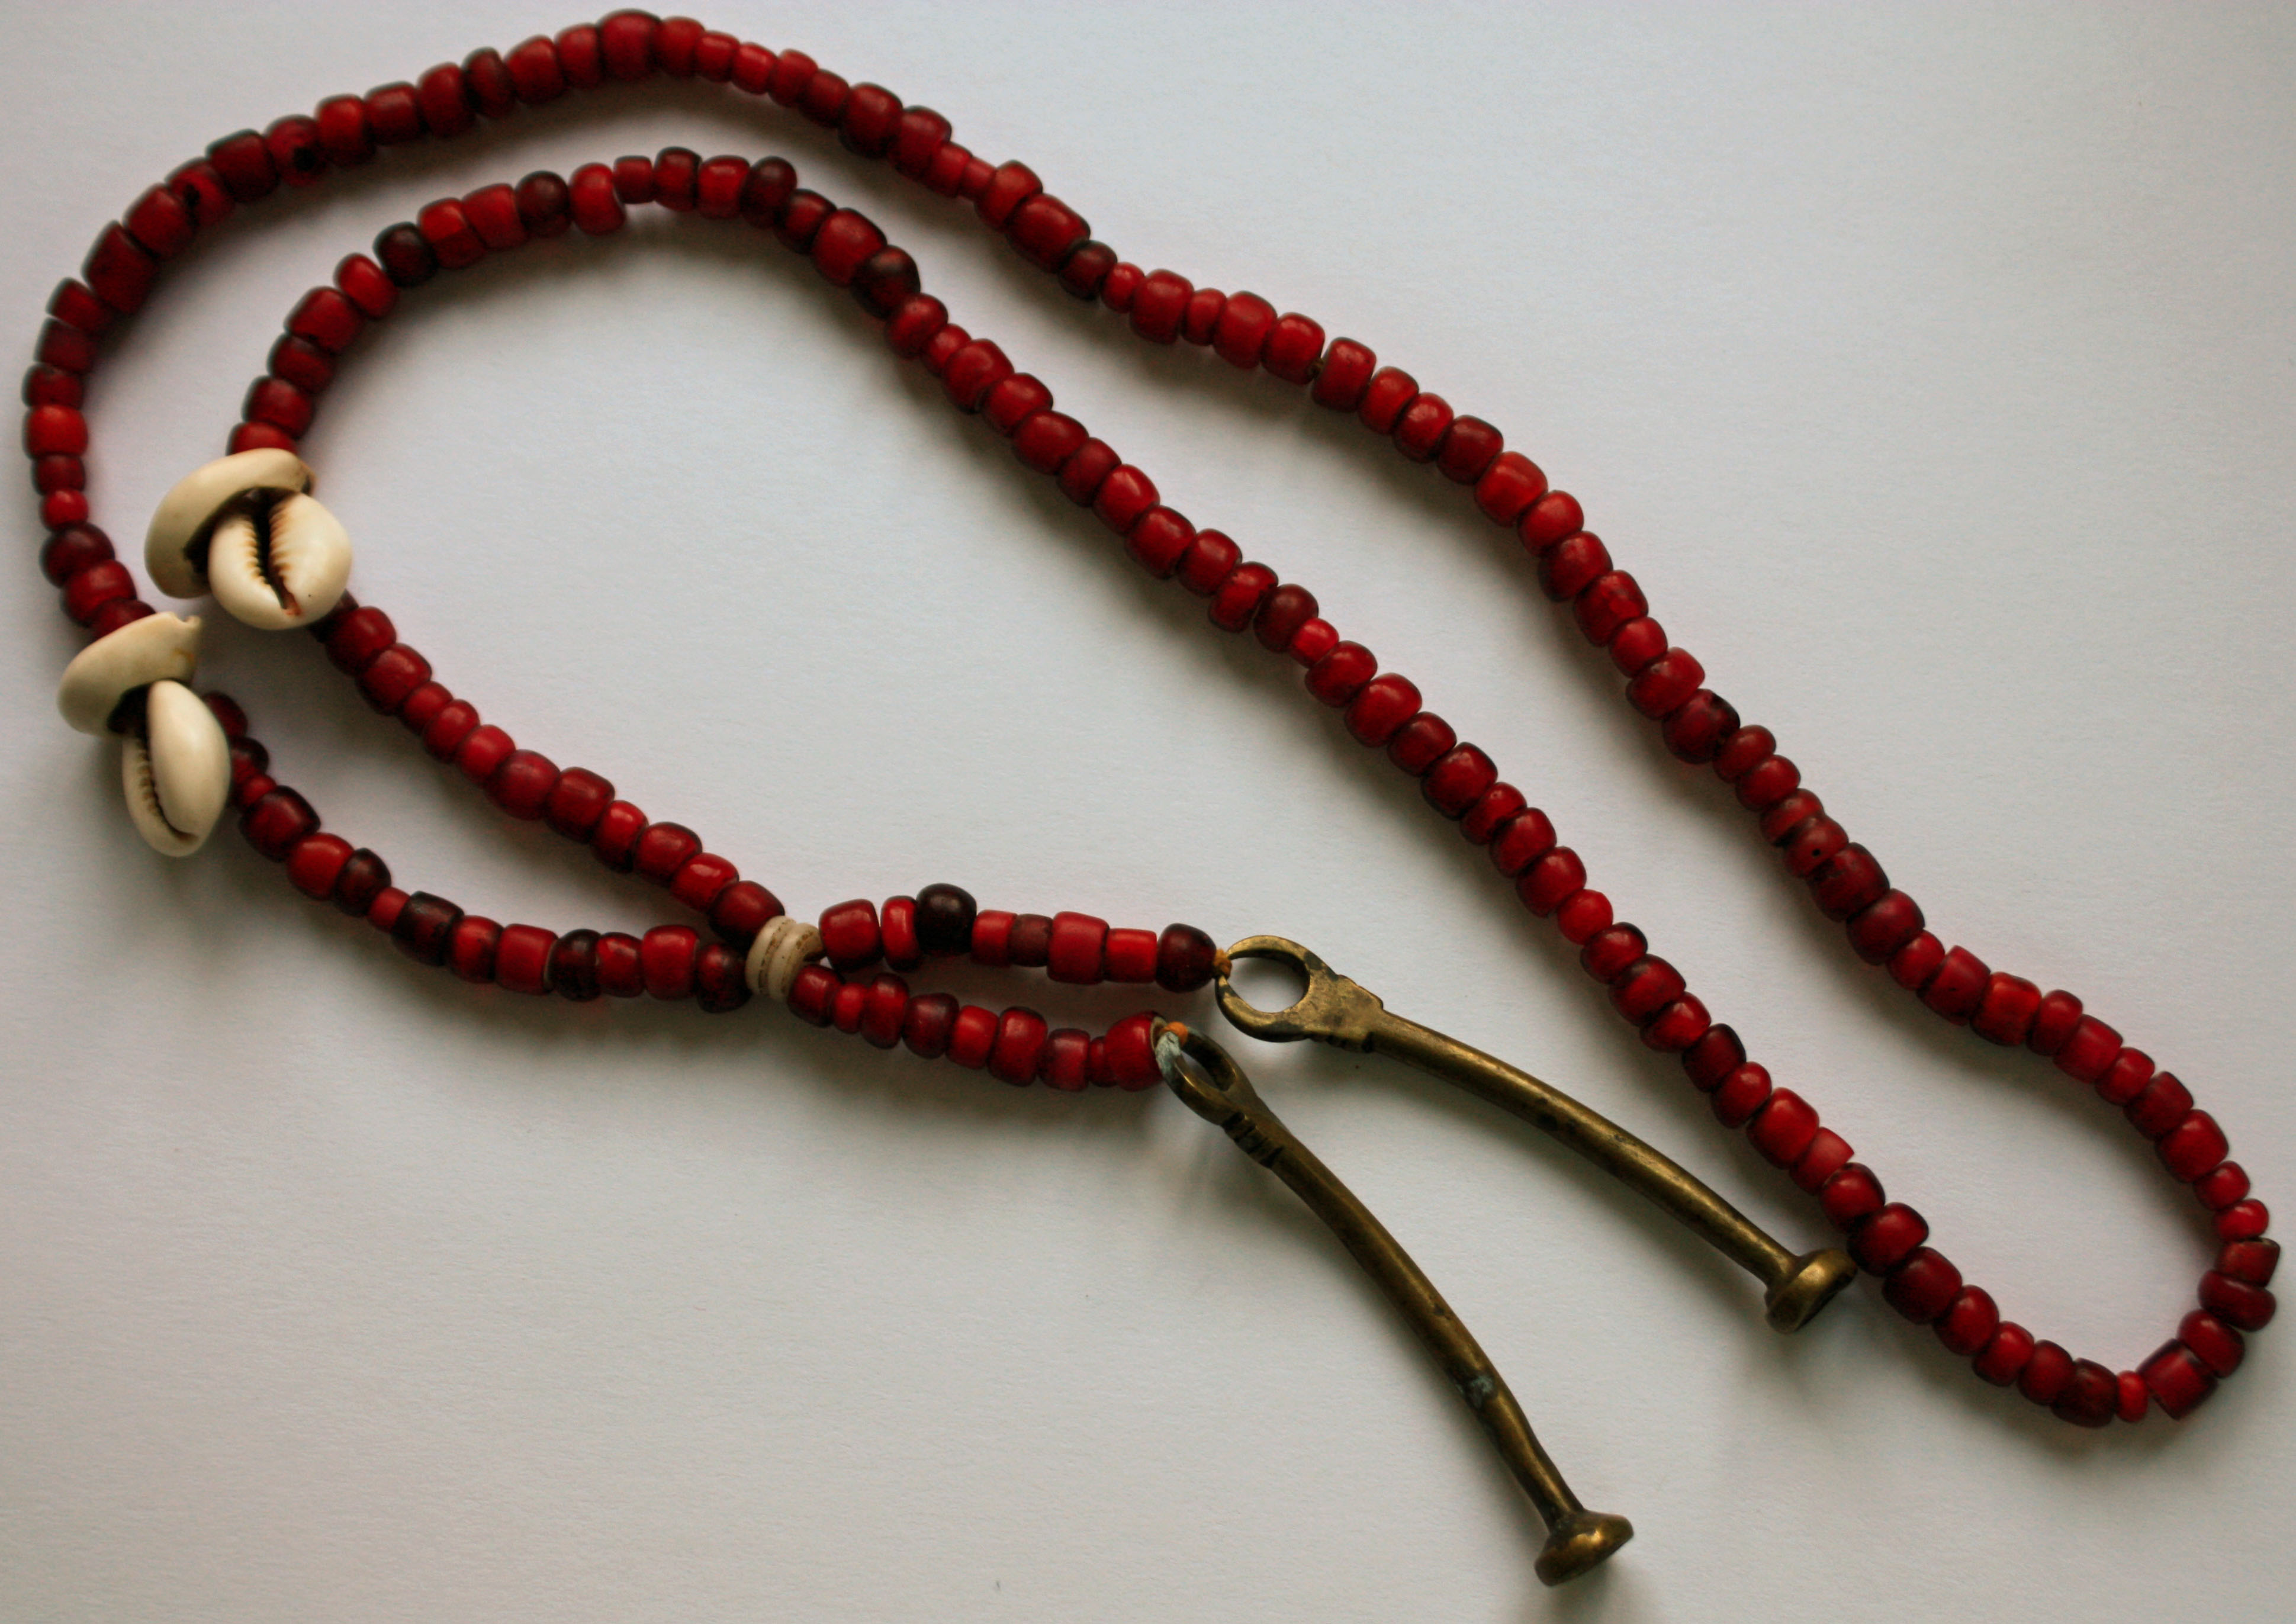 Friend's Great Grandmother's Red Bead Necklace – Where is it From